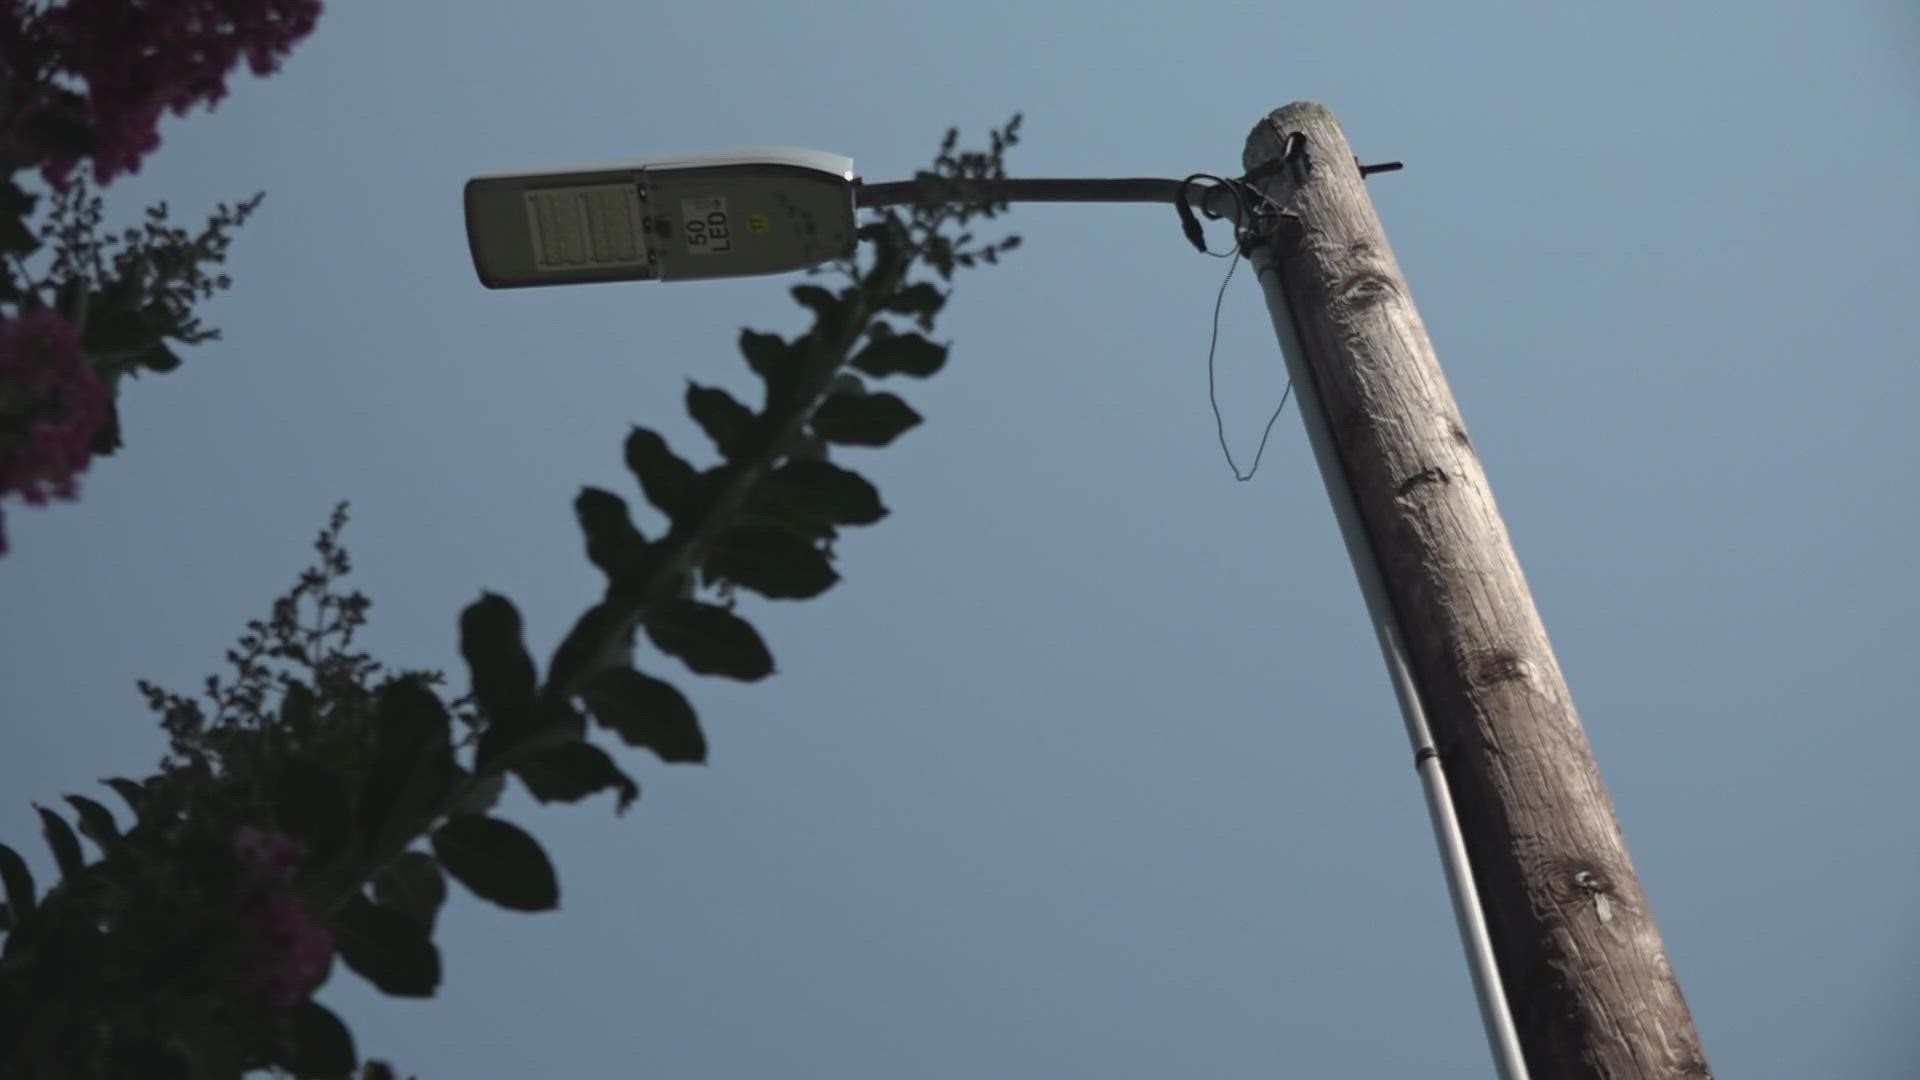 For the last three-and-a-half years Herman Powell has been charged for a broken light pole on the edge of his Trinity, NC property.